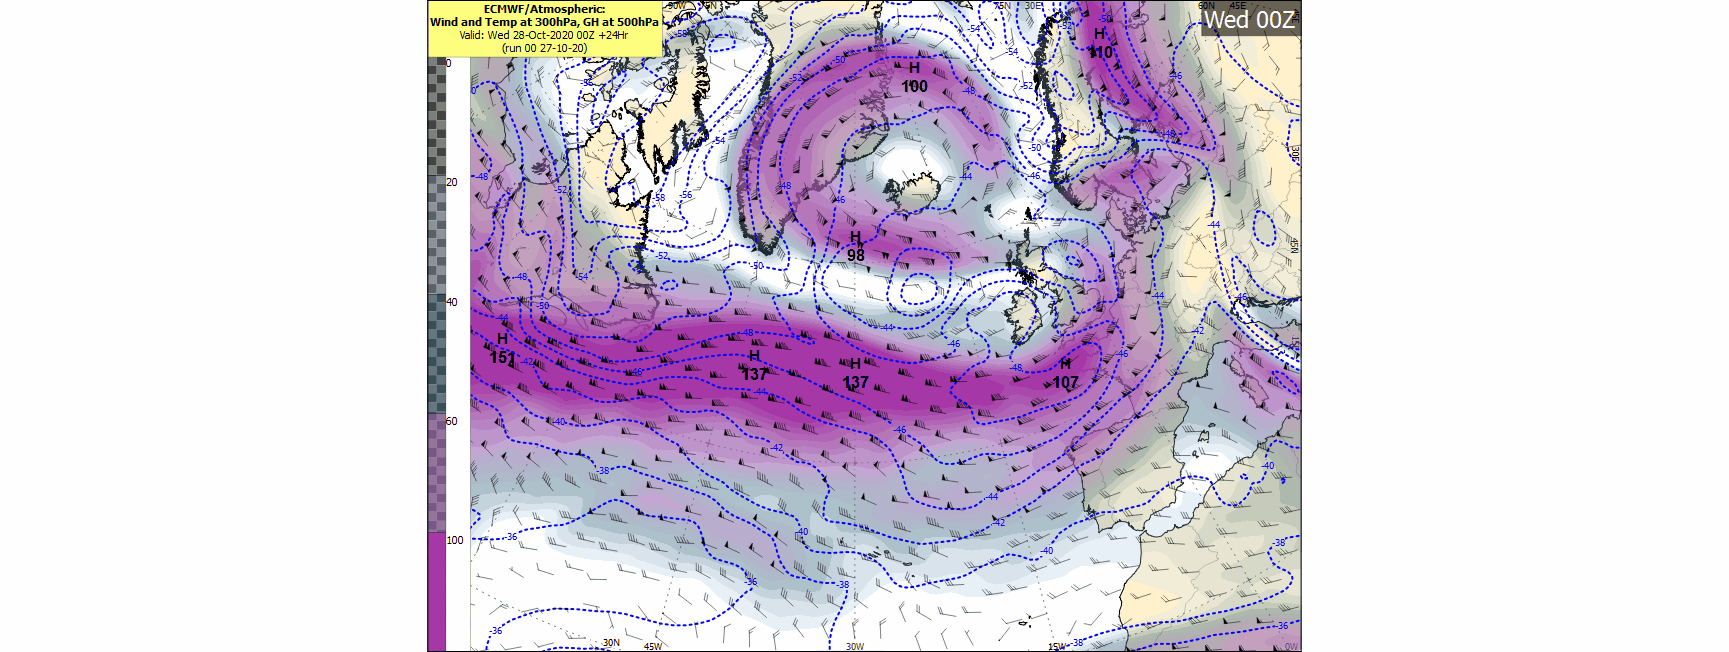 (Fig 1: The Jet-Stream across the North Atlantic is expected to intensify this week with speeds in excess of 165 knots forecast at a height of 300hPa by 00UTC Saturday October 31st. Forecast chart issued by ECMWF)